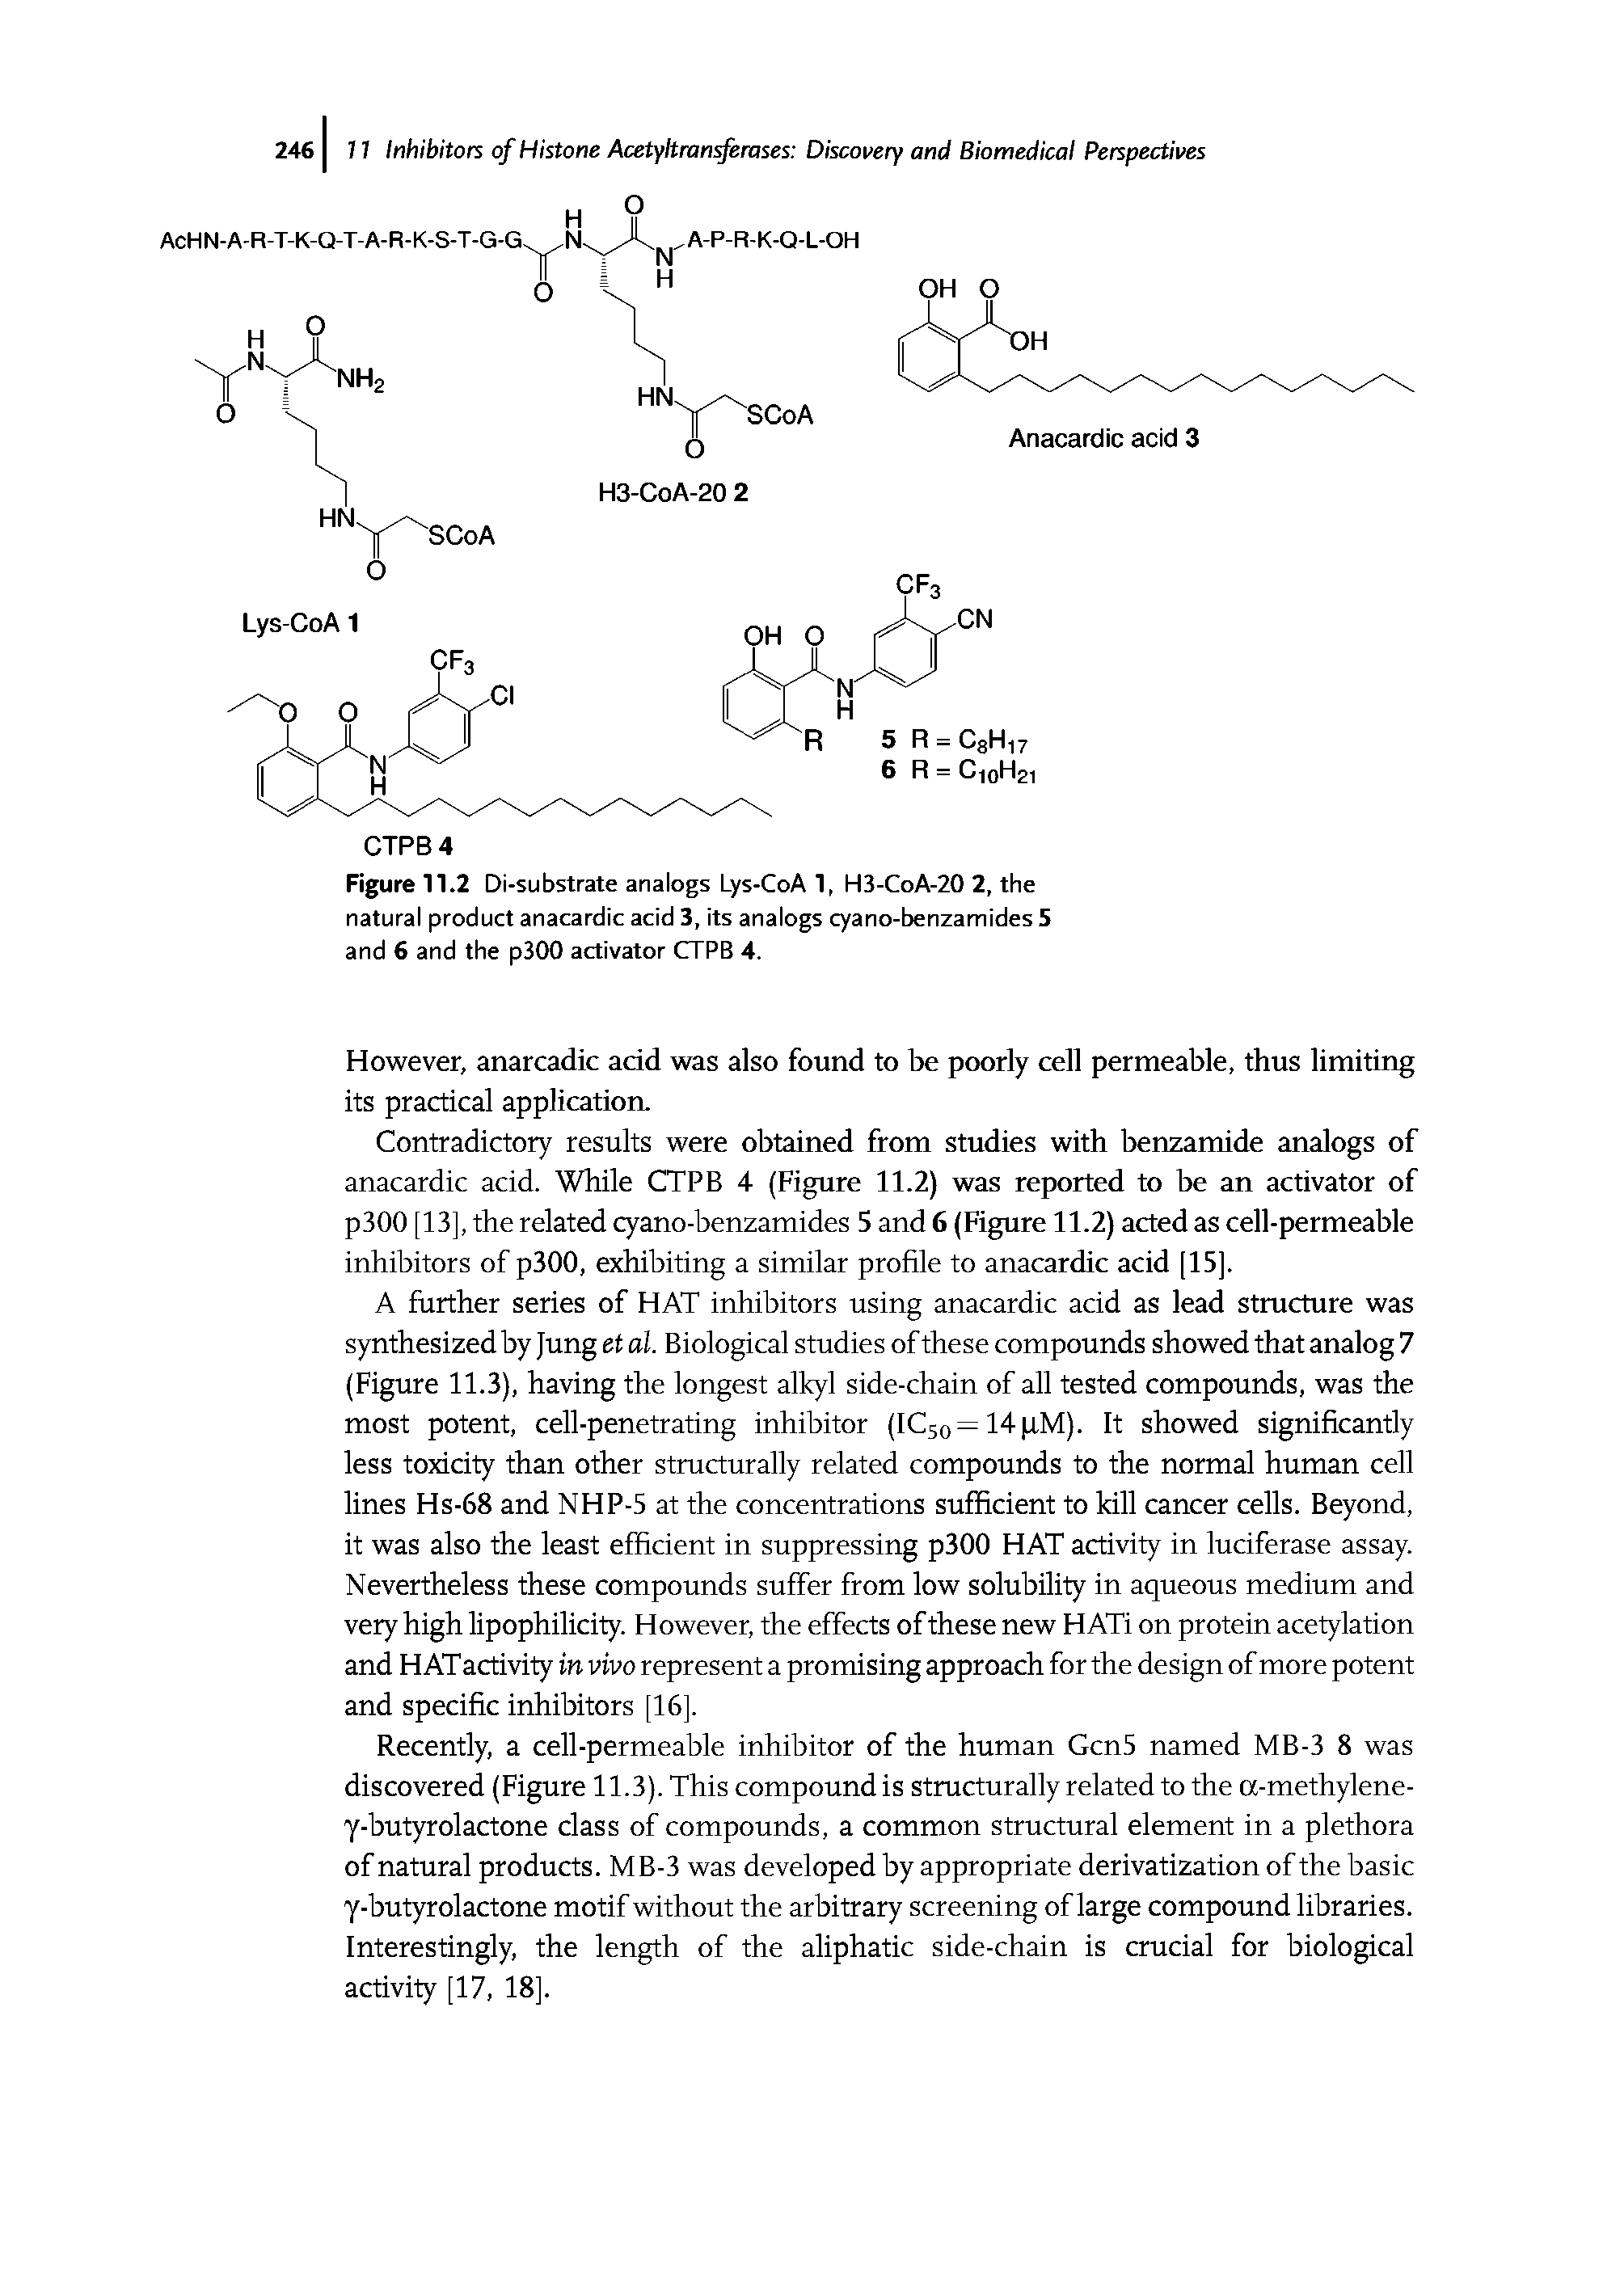 Figure 11.2 Di-substrate analogs Lys-CoA 1, H3-CoA-20 2, the natural product anacardic acid 3, its analogs cyano-benzamides 5 and 6 and the p300 activator CTPB 4.